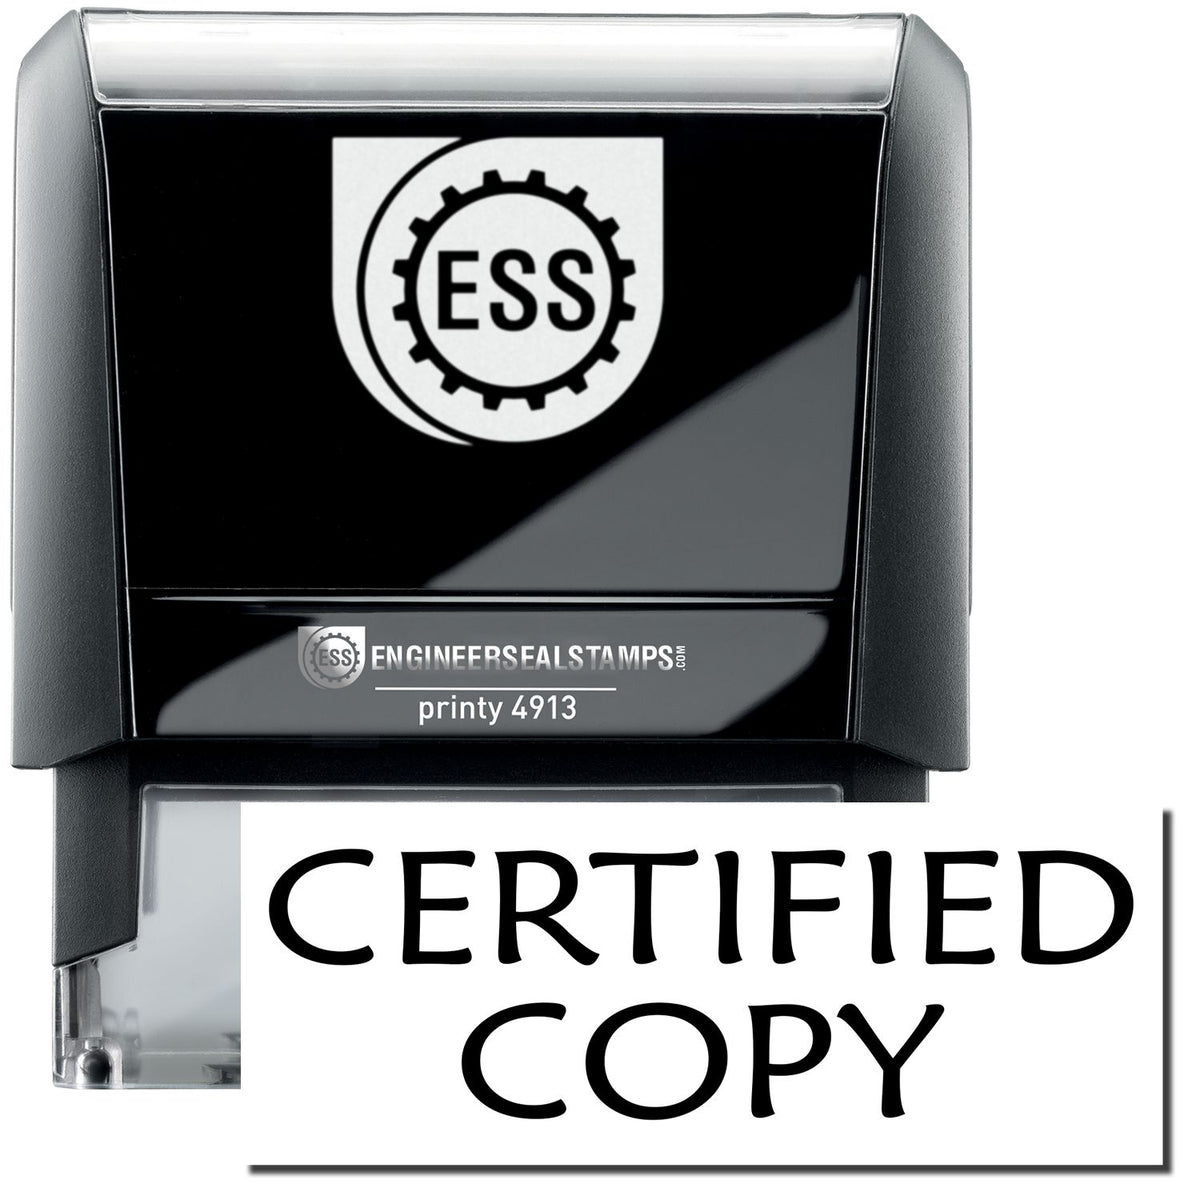 A self-inking stamp with a stamped image showing how the text &quot;CERTIFIED COPY&quot; in a large bold font is displayed by it.